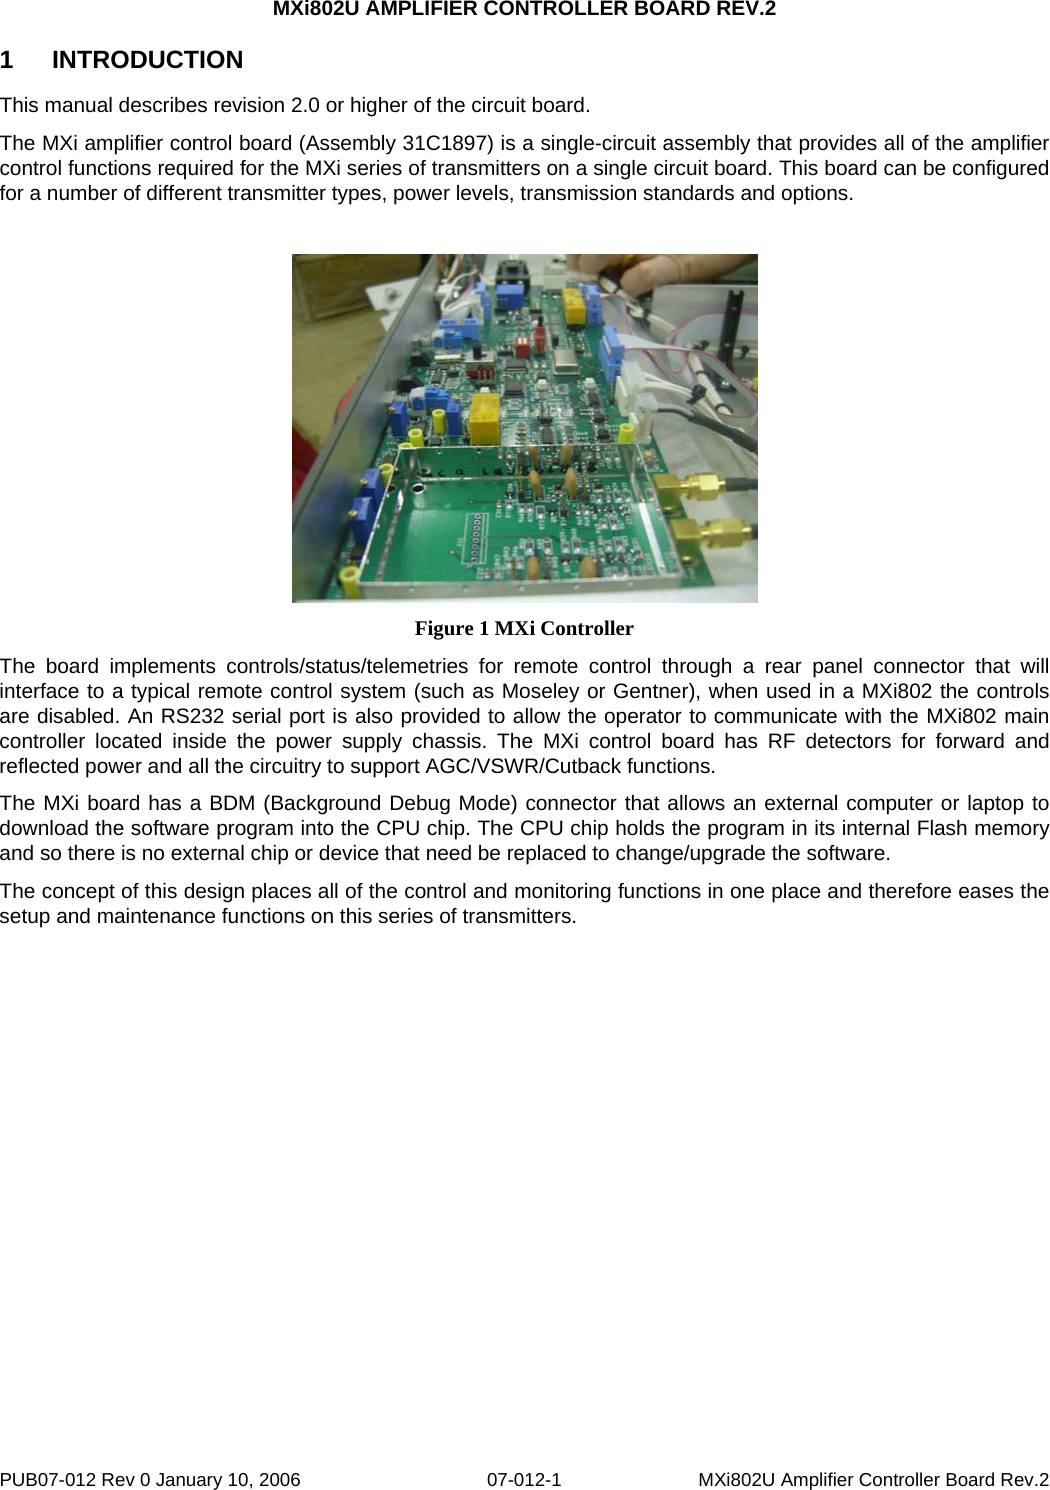 MXi802U AMPLIFIER CONTROLLER BOARD REV.2 PUB07-012 Rev 0 January 10, 2006  07-012-1  MXi802U Amplifier Controller Board Rev.2 1 INTRODUCTION This manual describes revision 2.0 or higher of the circuit board.   The MXi amplifier control board (Assembly 31C1897) is a single-circuit assembly that provides all of the amplifier control functions required for the MXi series of transmitters on a single circuit board. This board can be configured for a number of different transmitter types, power levels, transmission standards and options.    Figure 1 MXi Controller The board implements controls/status/telemetries for remote control through a rear panel connector that will interface to a typical remote control system (such as Moseley or Gentner), when used in a MXi802 the controls are disabled. An RS232 serial port is also provided to allow the operator to communicate with the MXi802 main controller located inside the power supply chassis. The MXi control board has RF detectors for forward and reflected power and all the circuitry to support AGC/VSWR/Cutback functions.  The MXi board has a BDM (Background Debug Mode) connector that allows an external computer or laptop to download the software program into the CPU chip. The CPU chip holds the program in its internal Flash memory and so there is no external chip or device that need be replaced to change/upgrade the software.  The concept of this design places all of the control and monitoring functions in one place and therefore eases the setup and maintenance functions on this series of transmitters.   